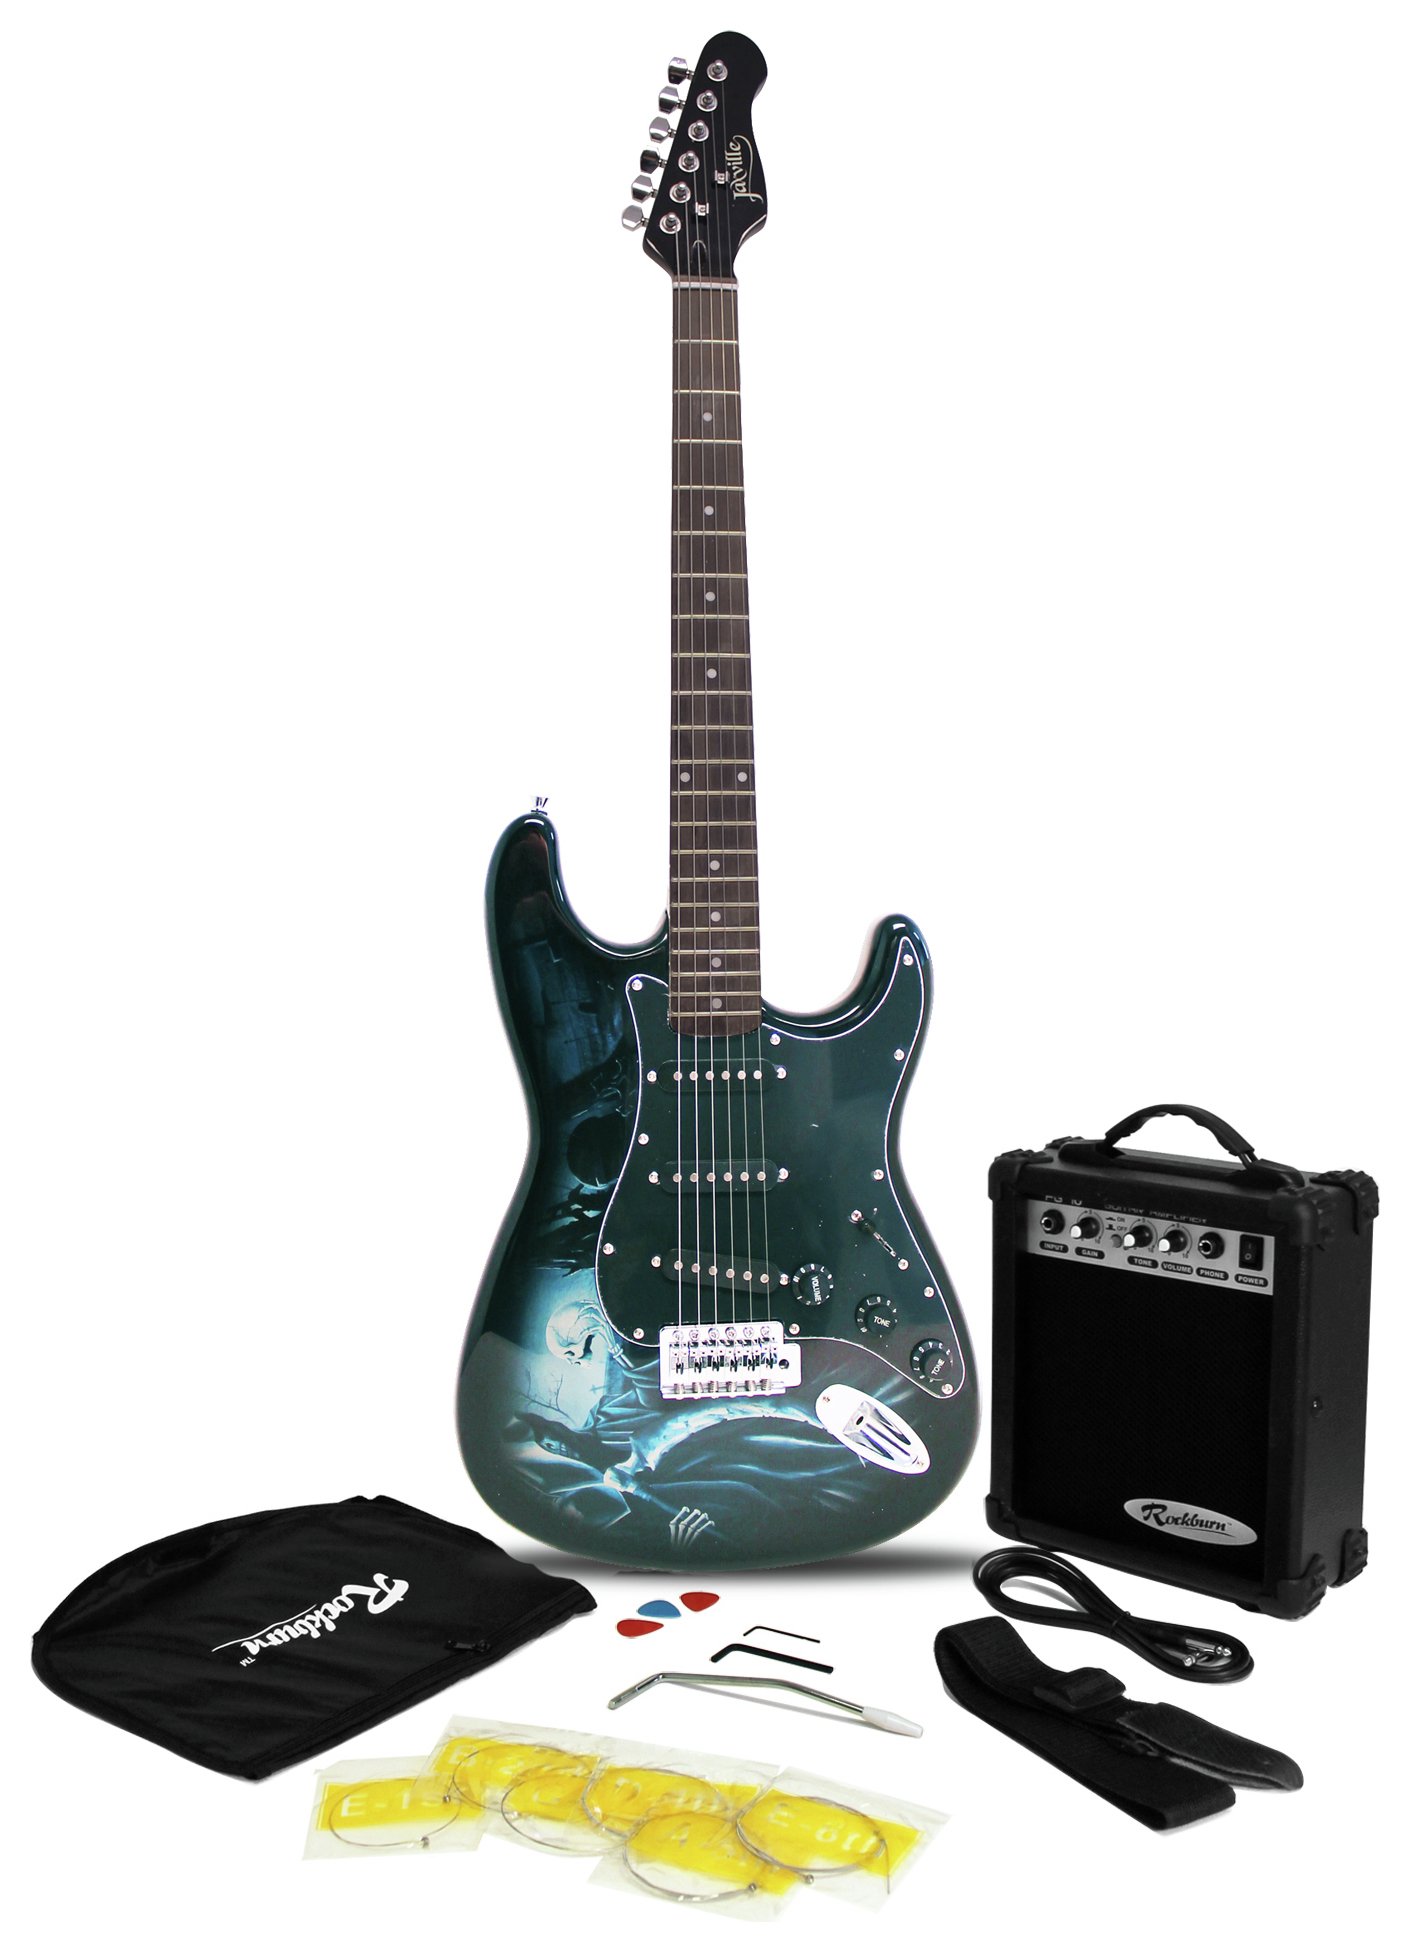 Jaxville Electric Guitar Pack review